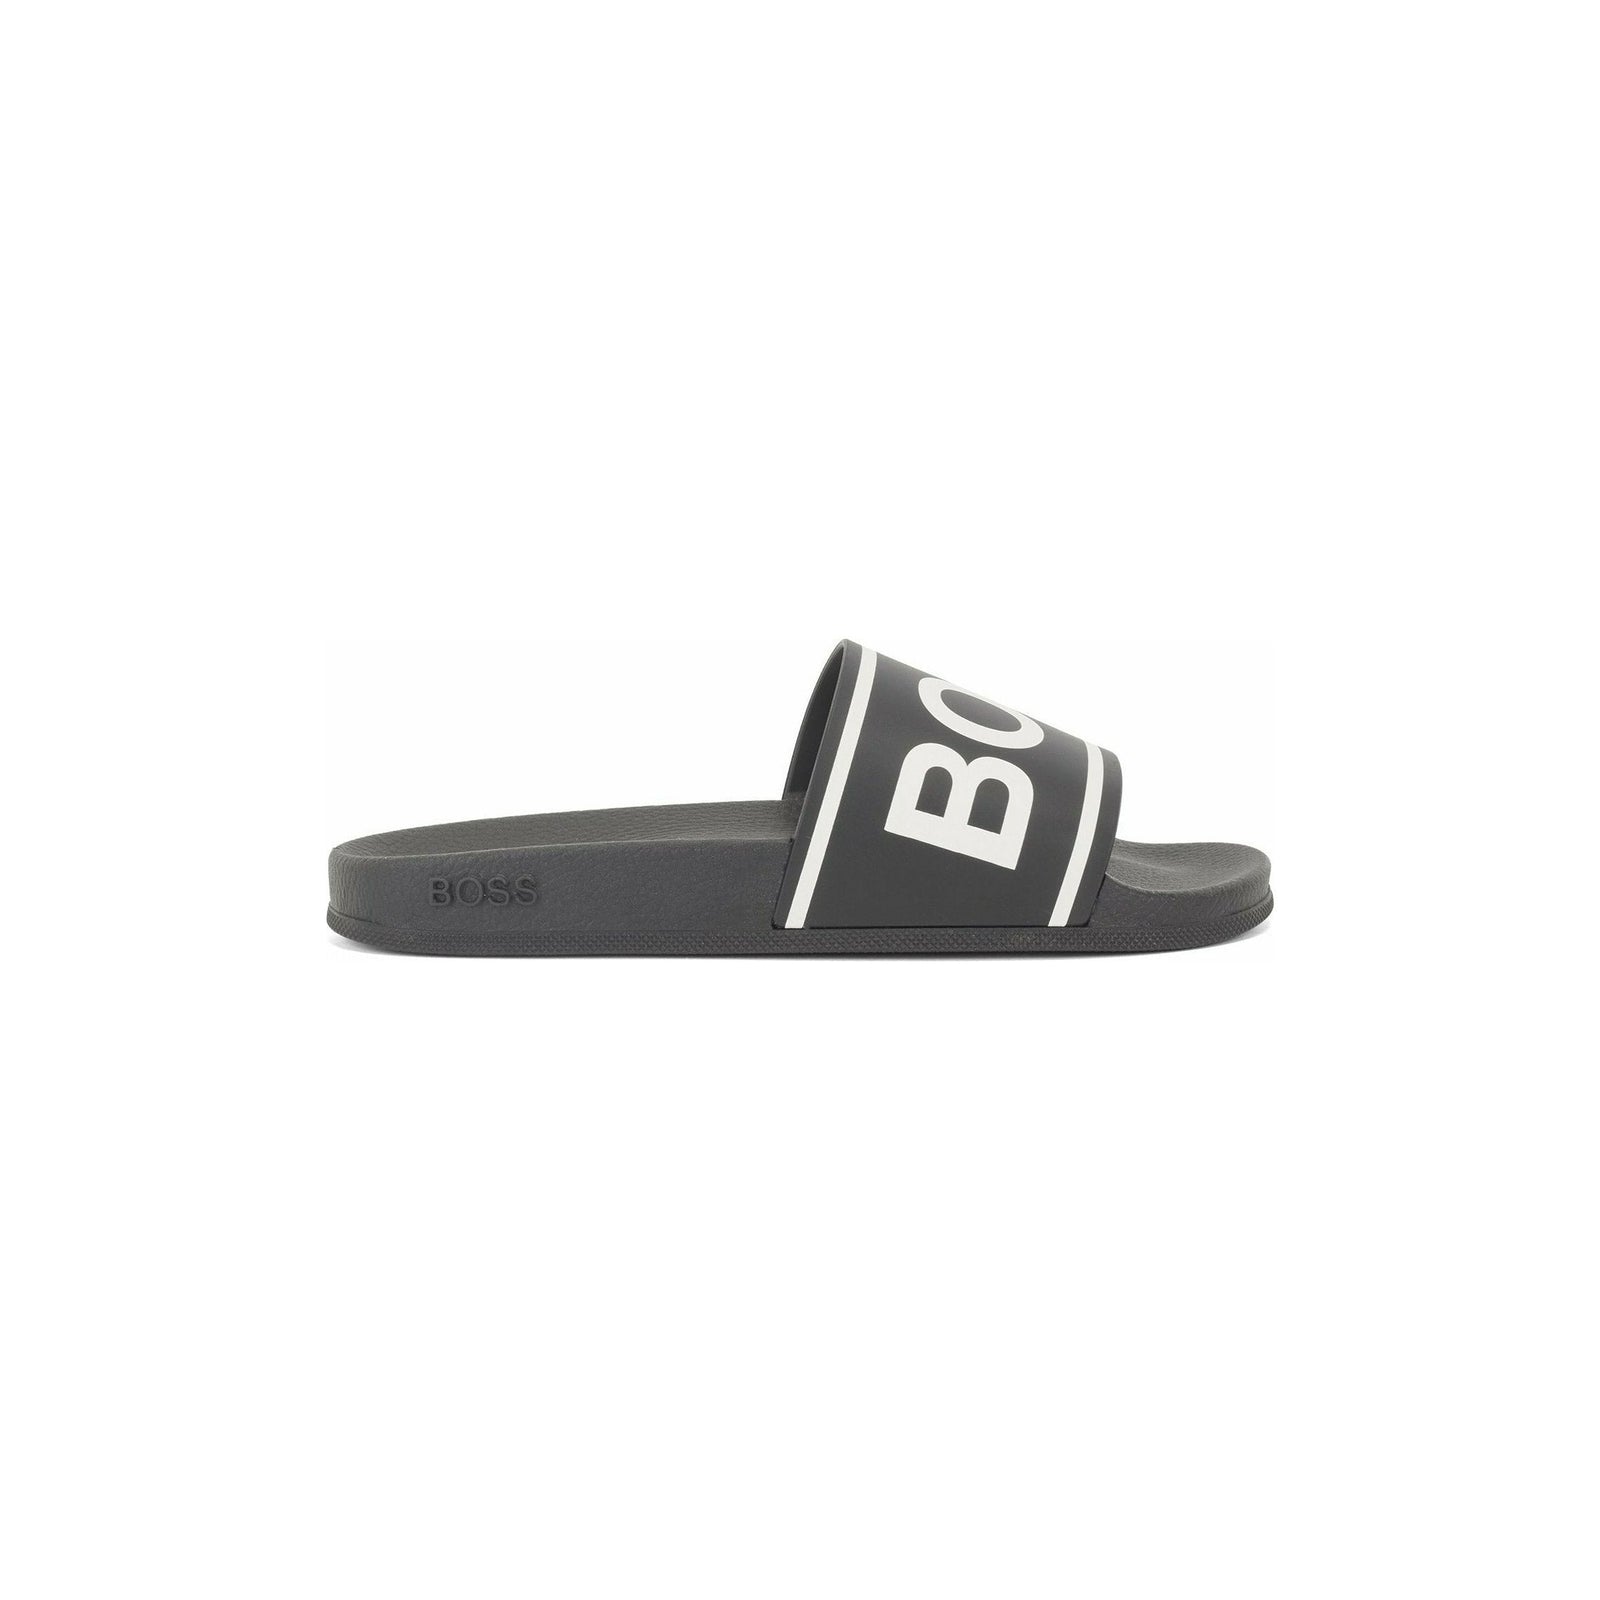 ITALIAN-MADE SLIDES WITH STRIPES AND LOGO - Yooto